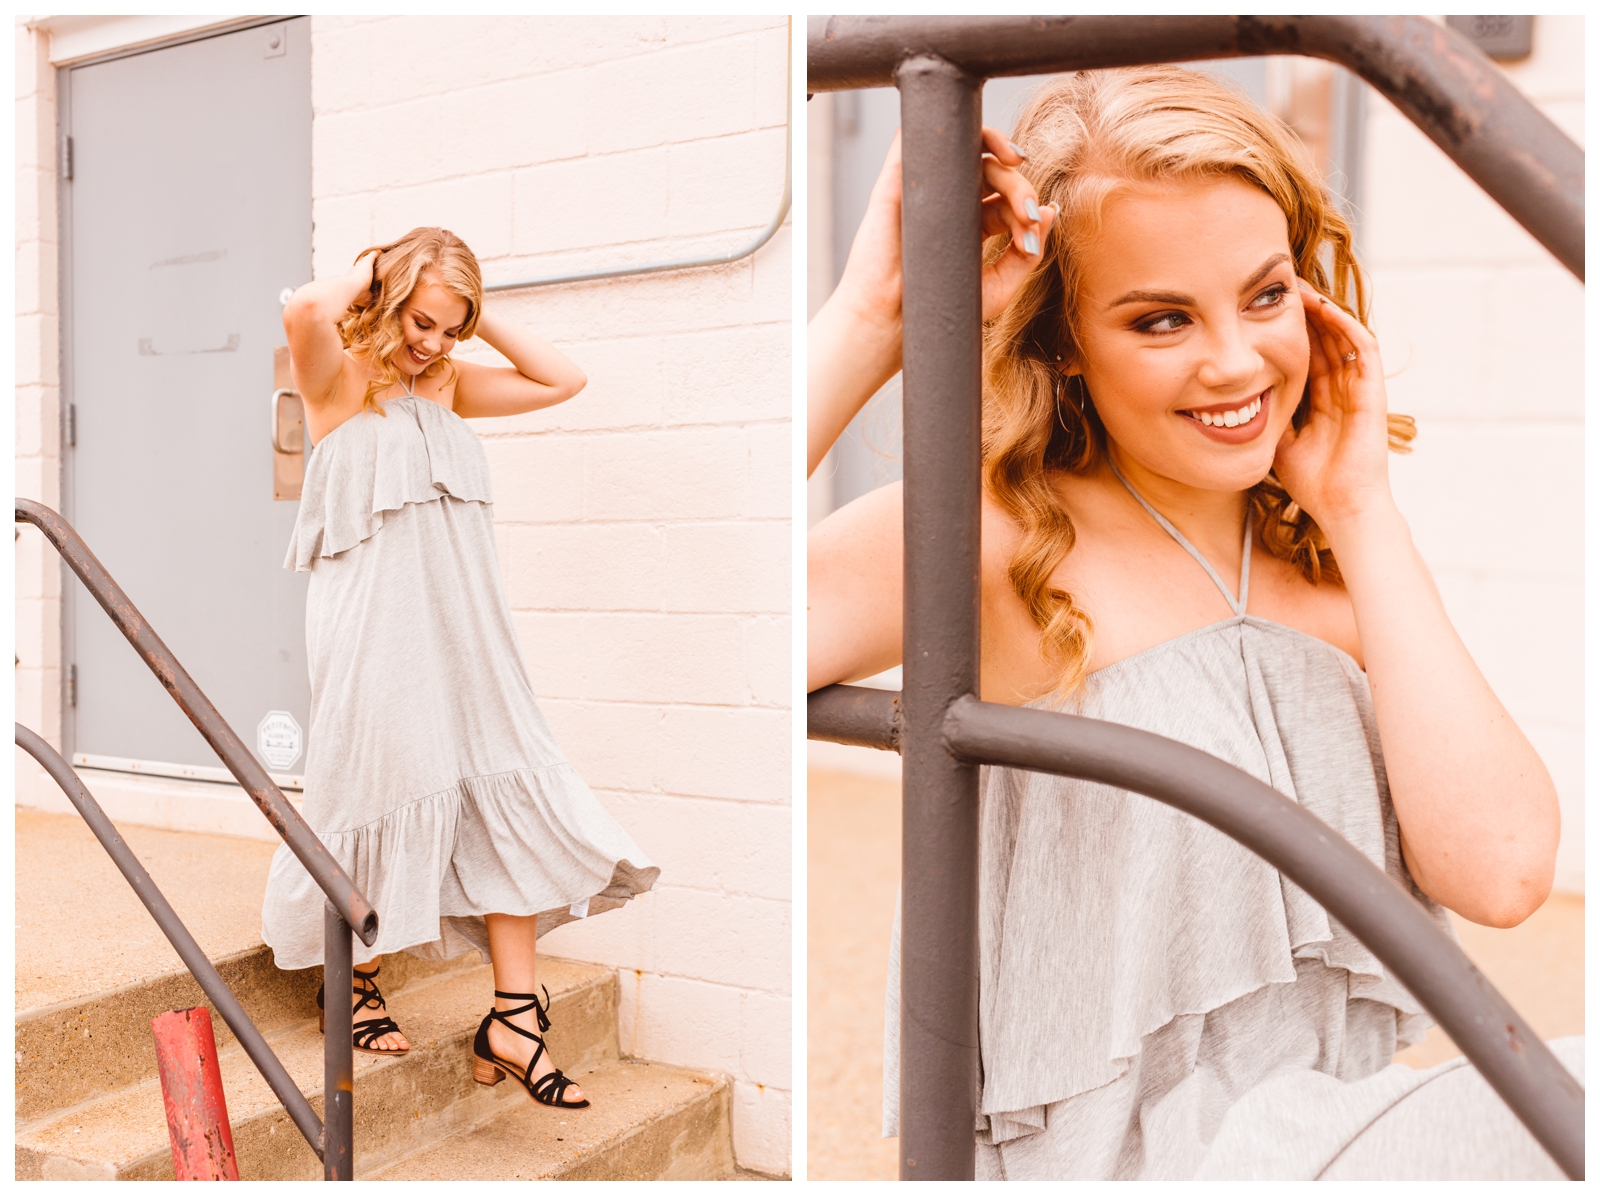 Downtown Annapolis Senior Session Inspiration -Brooke Michelle Photography